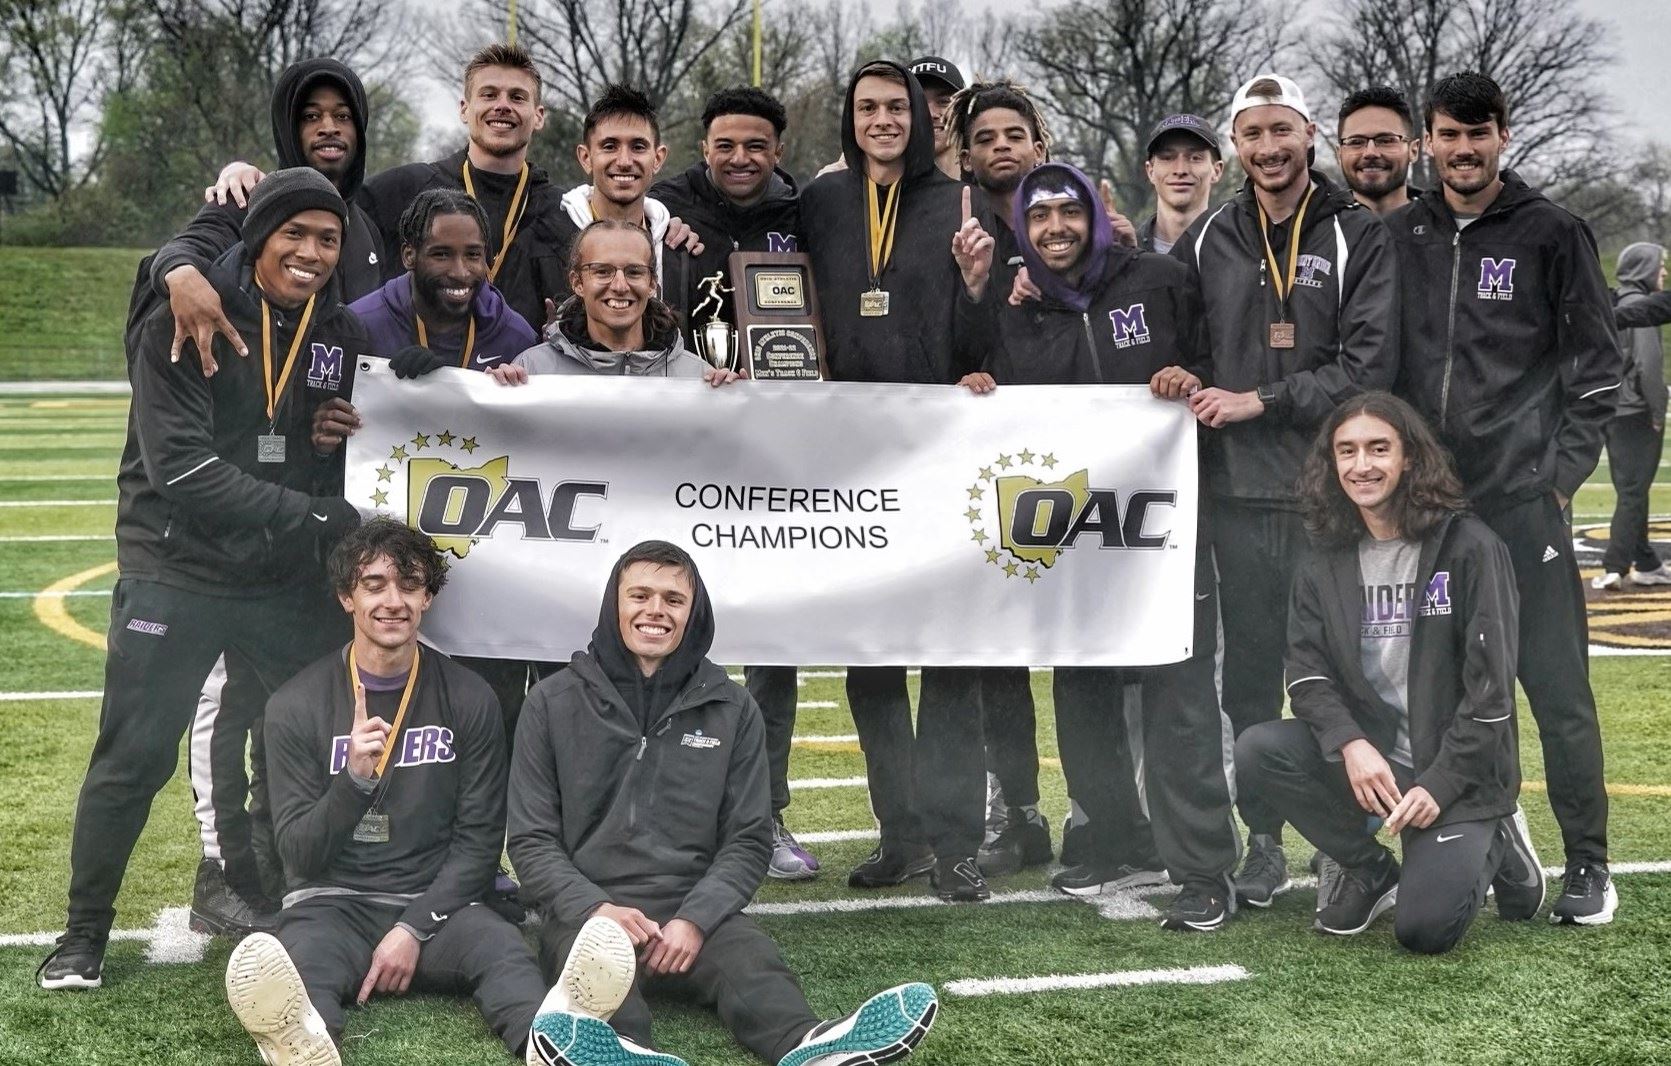 Mount Union Wins 11th OAC Outdoor Track and Field Championship